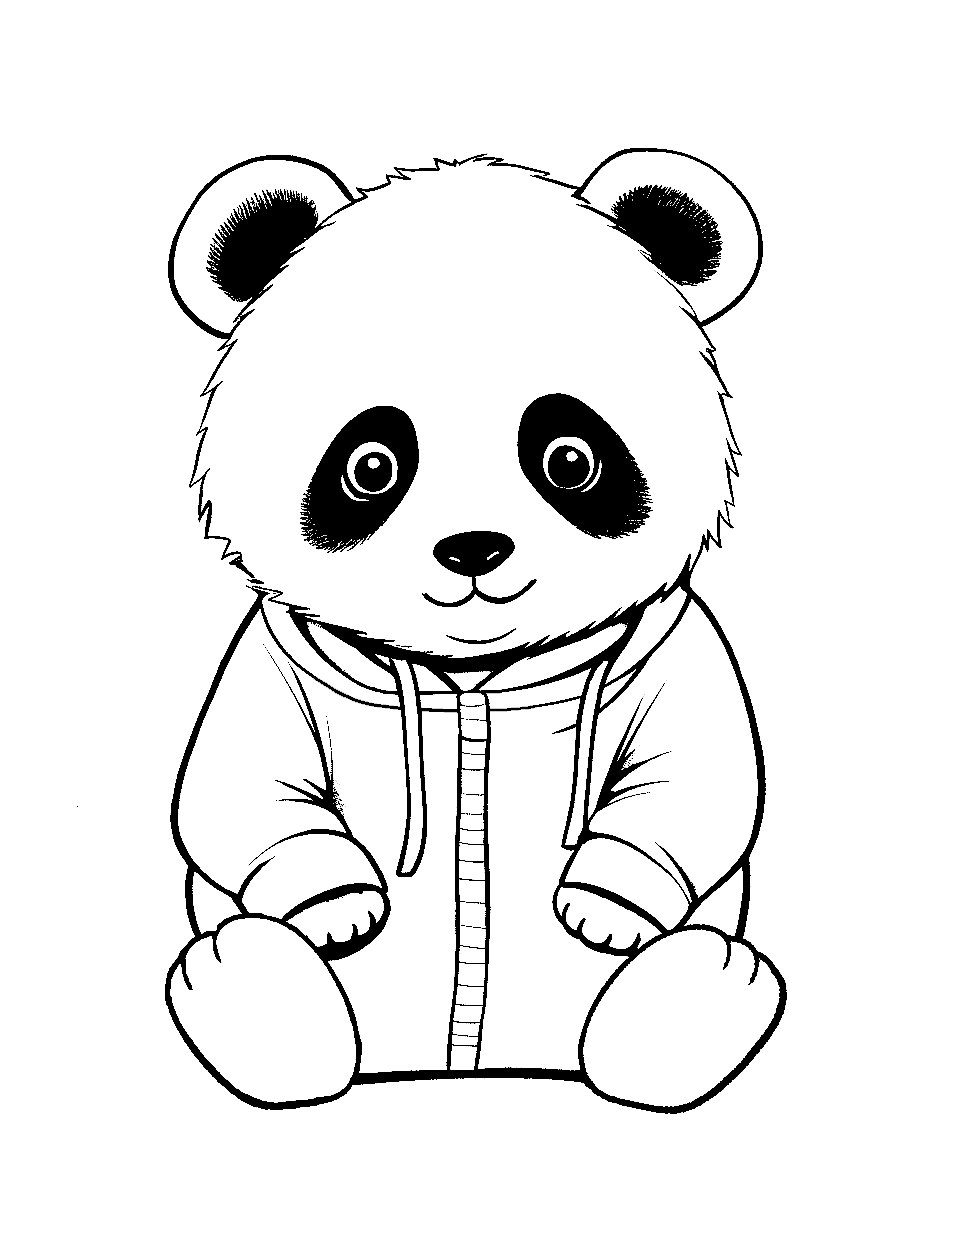 Panda Cub in a Onesie Coloring Page - A tiny, adorable panda cub dressed in a fluffy onesie.